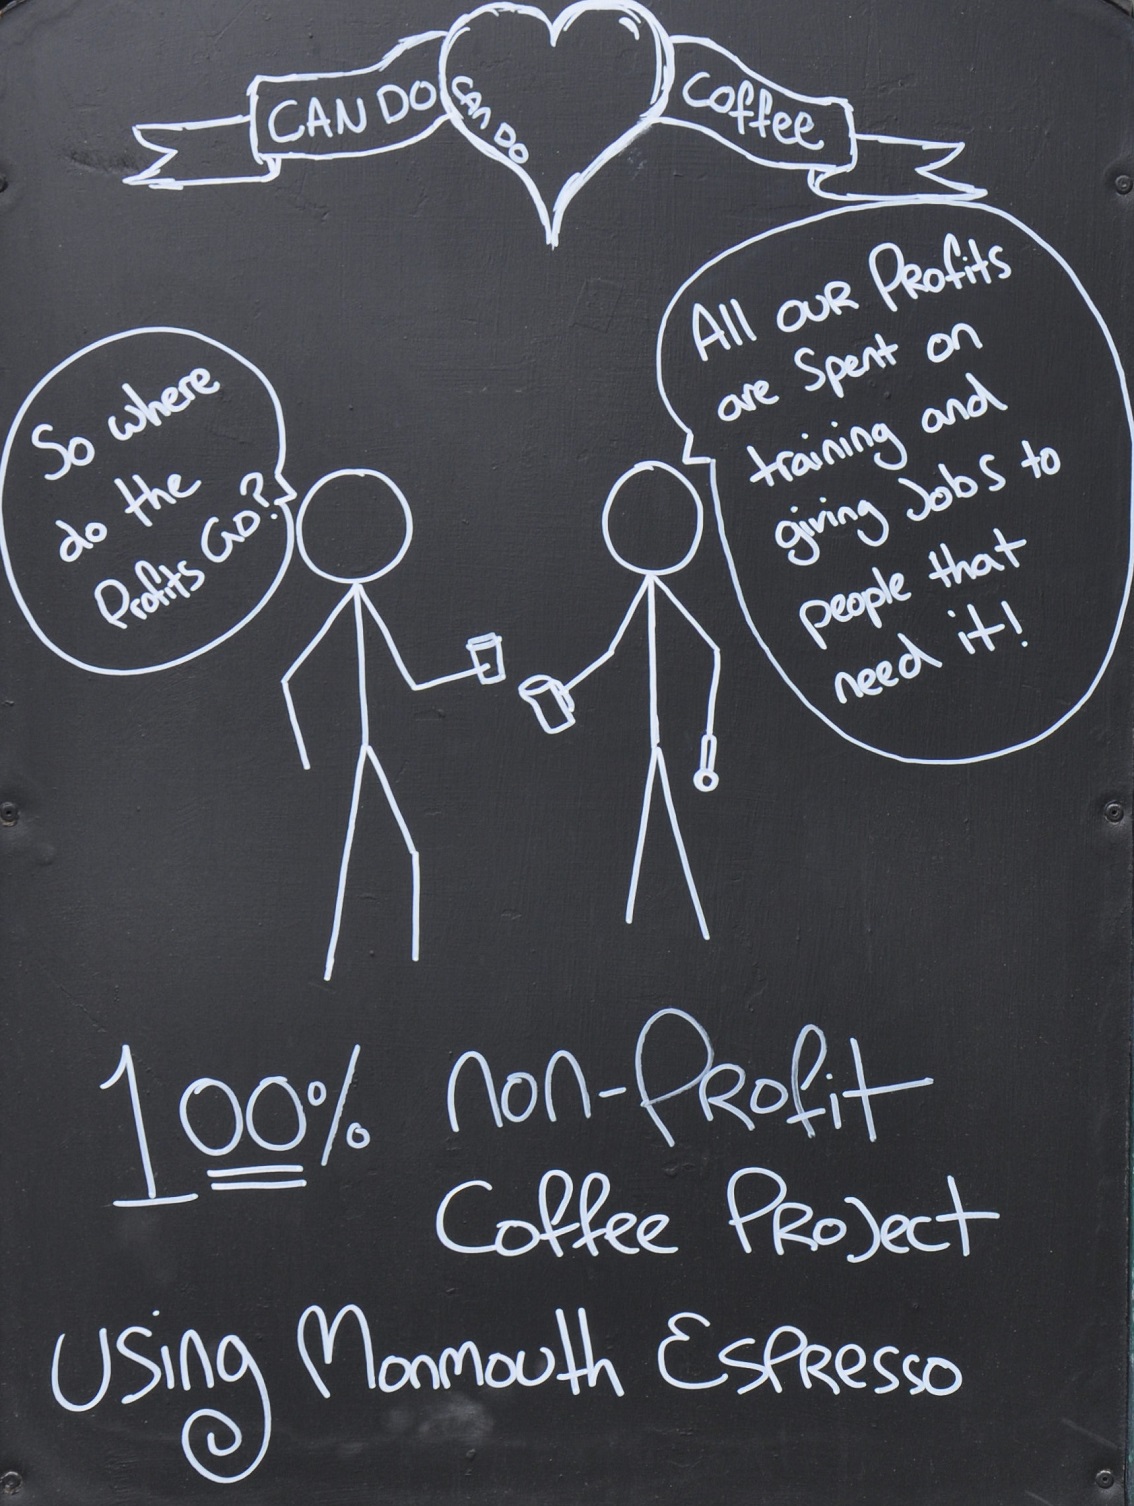 An A-board showing two stick figures talking. The first asks "So where do the profits go?" and the second answers "All our profits are spent on training and giving jobs to people that need it!". Underneath it says "100% non-profit coffee project using Monmouth espresso".